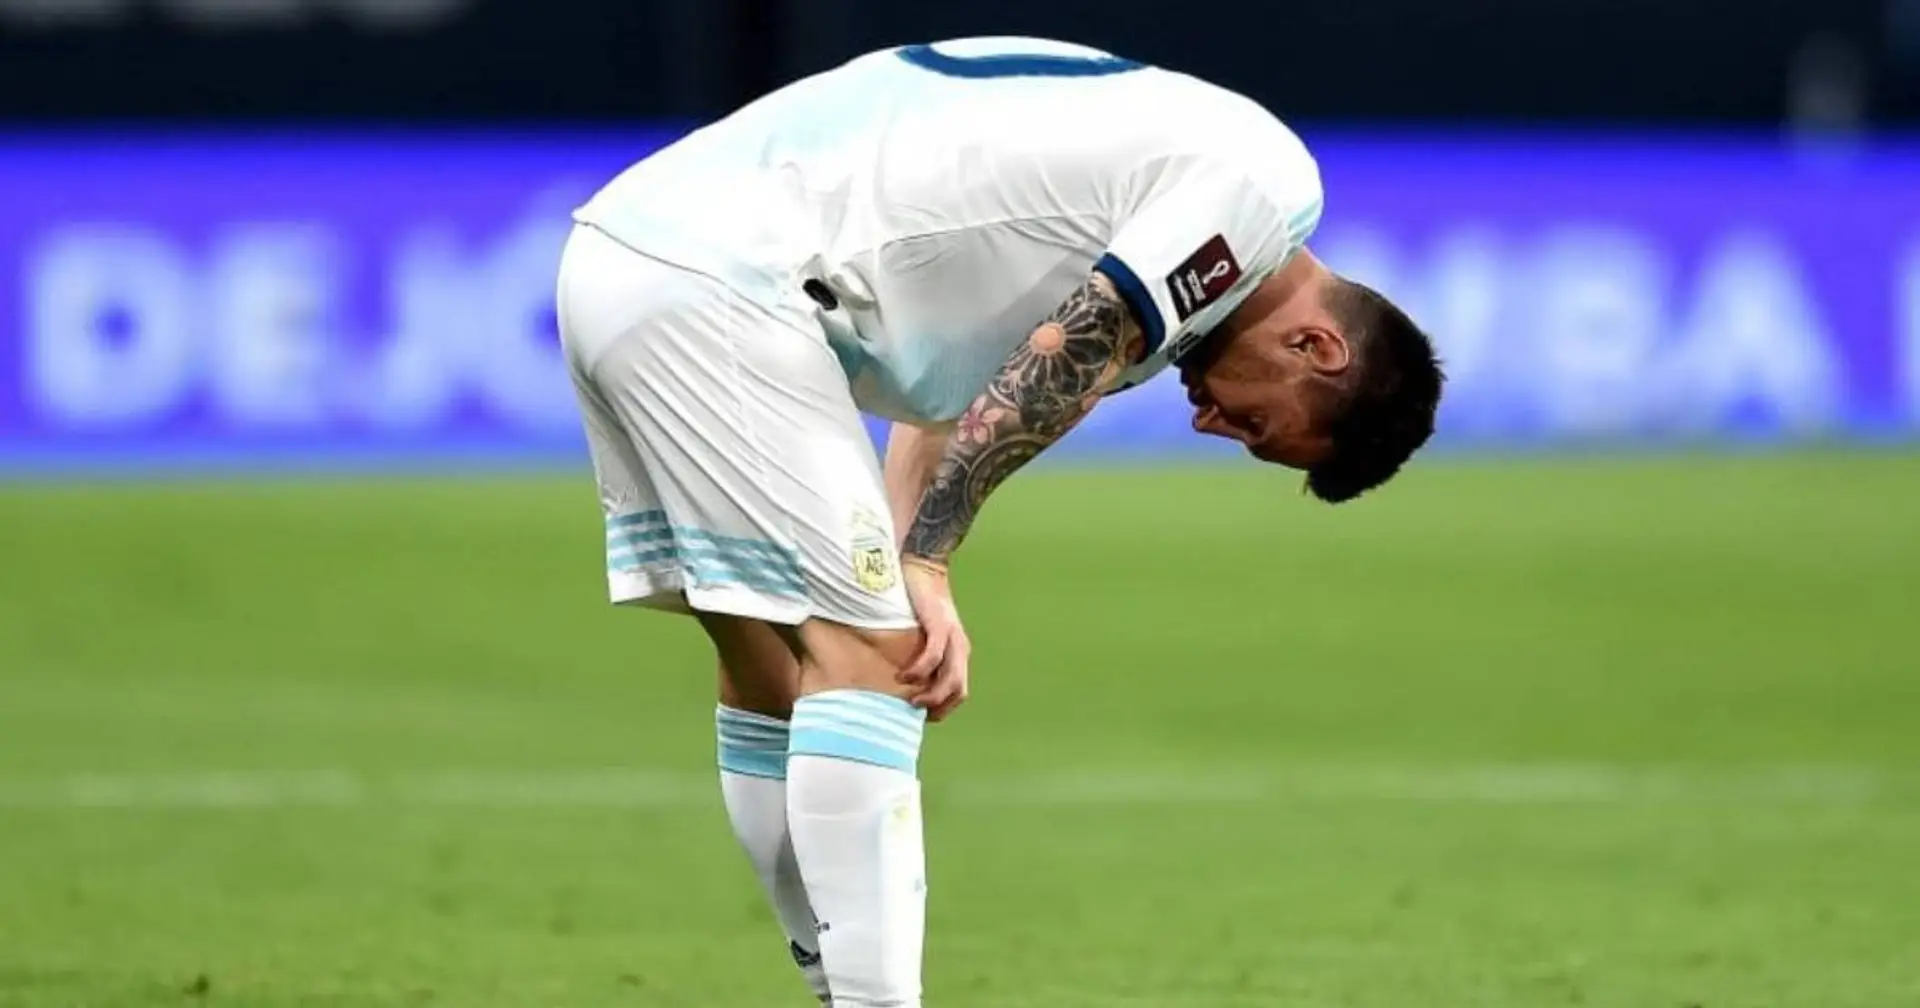 Old vomiting problems back again? Messi said to suffer from stomach discomfort against Paraguay